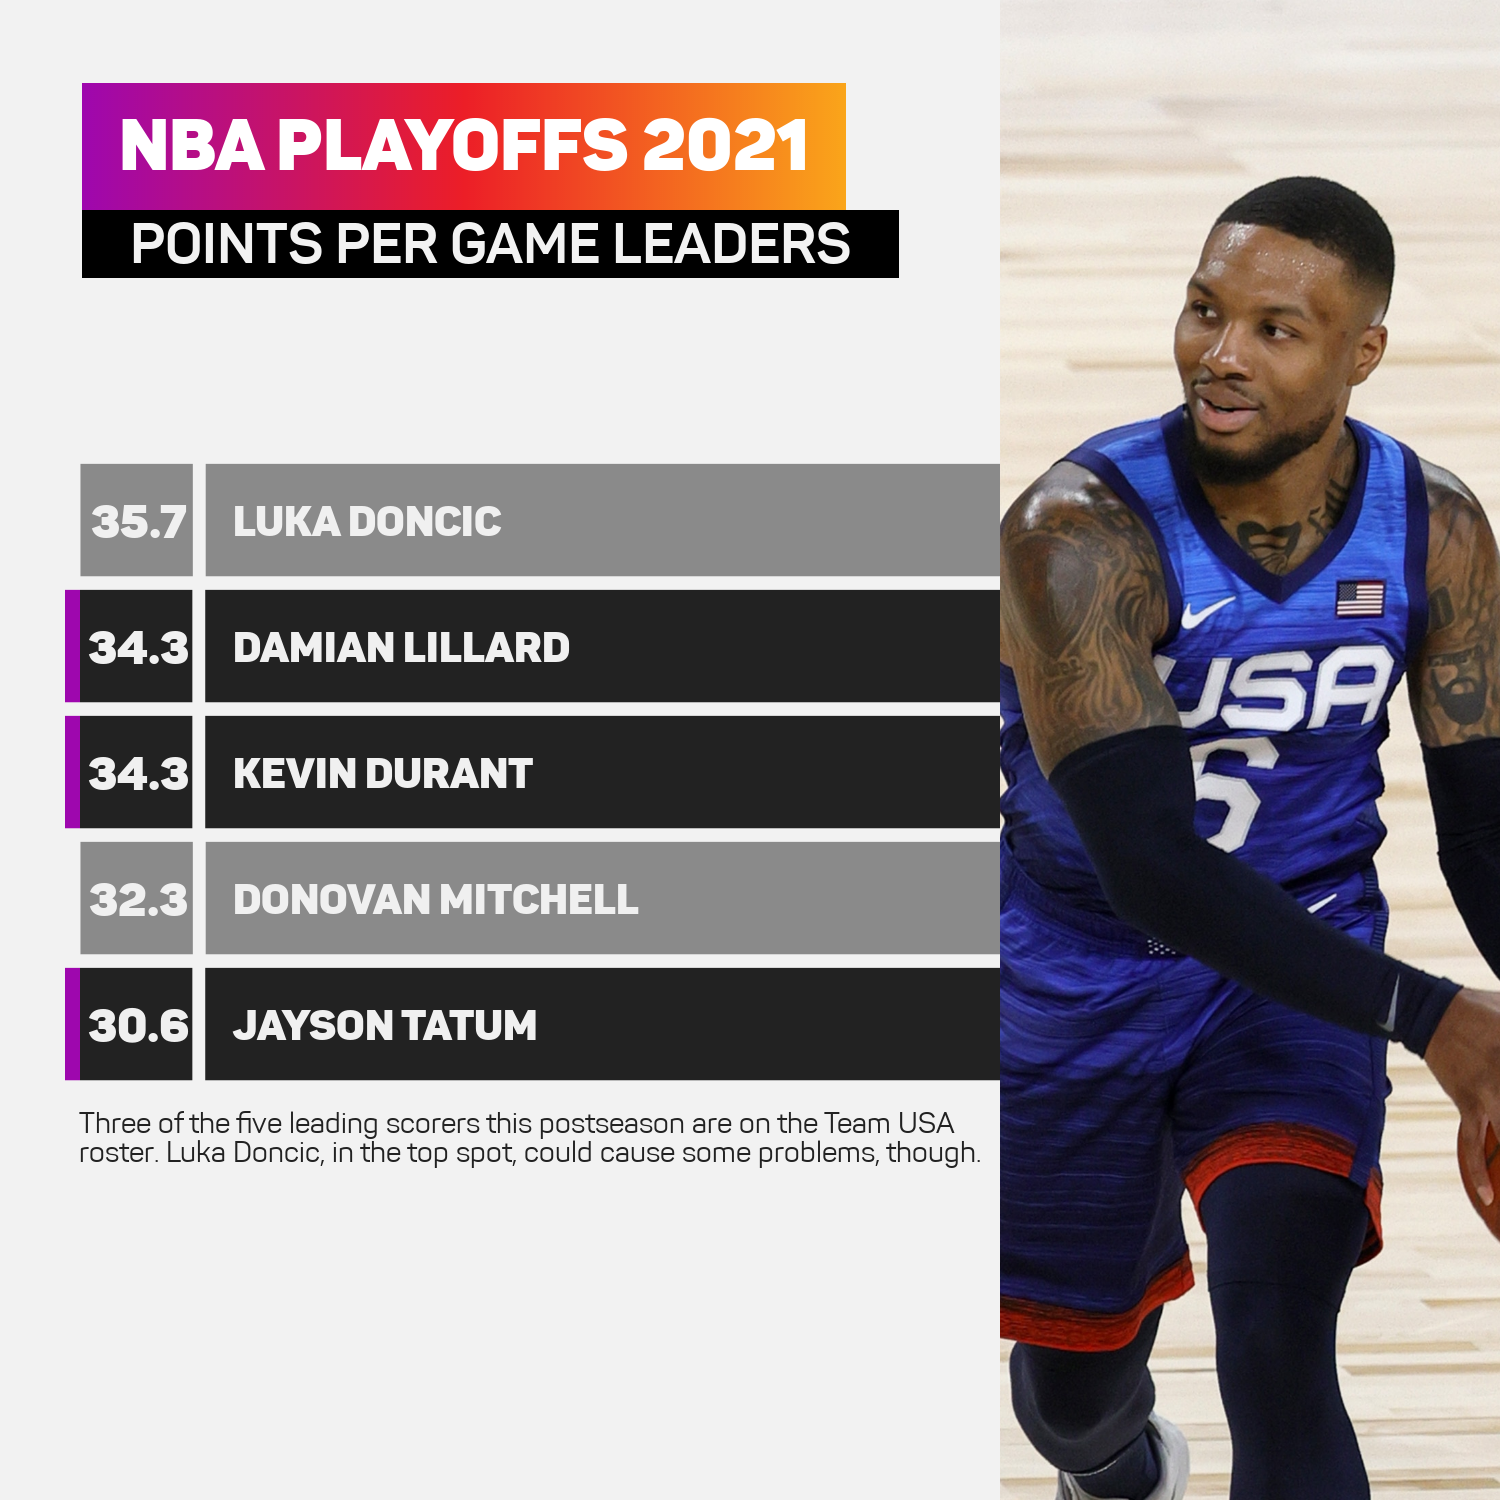 Damian Lillard starred in the playoffs before joining Team USA